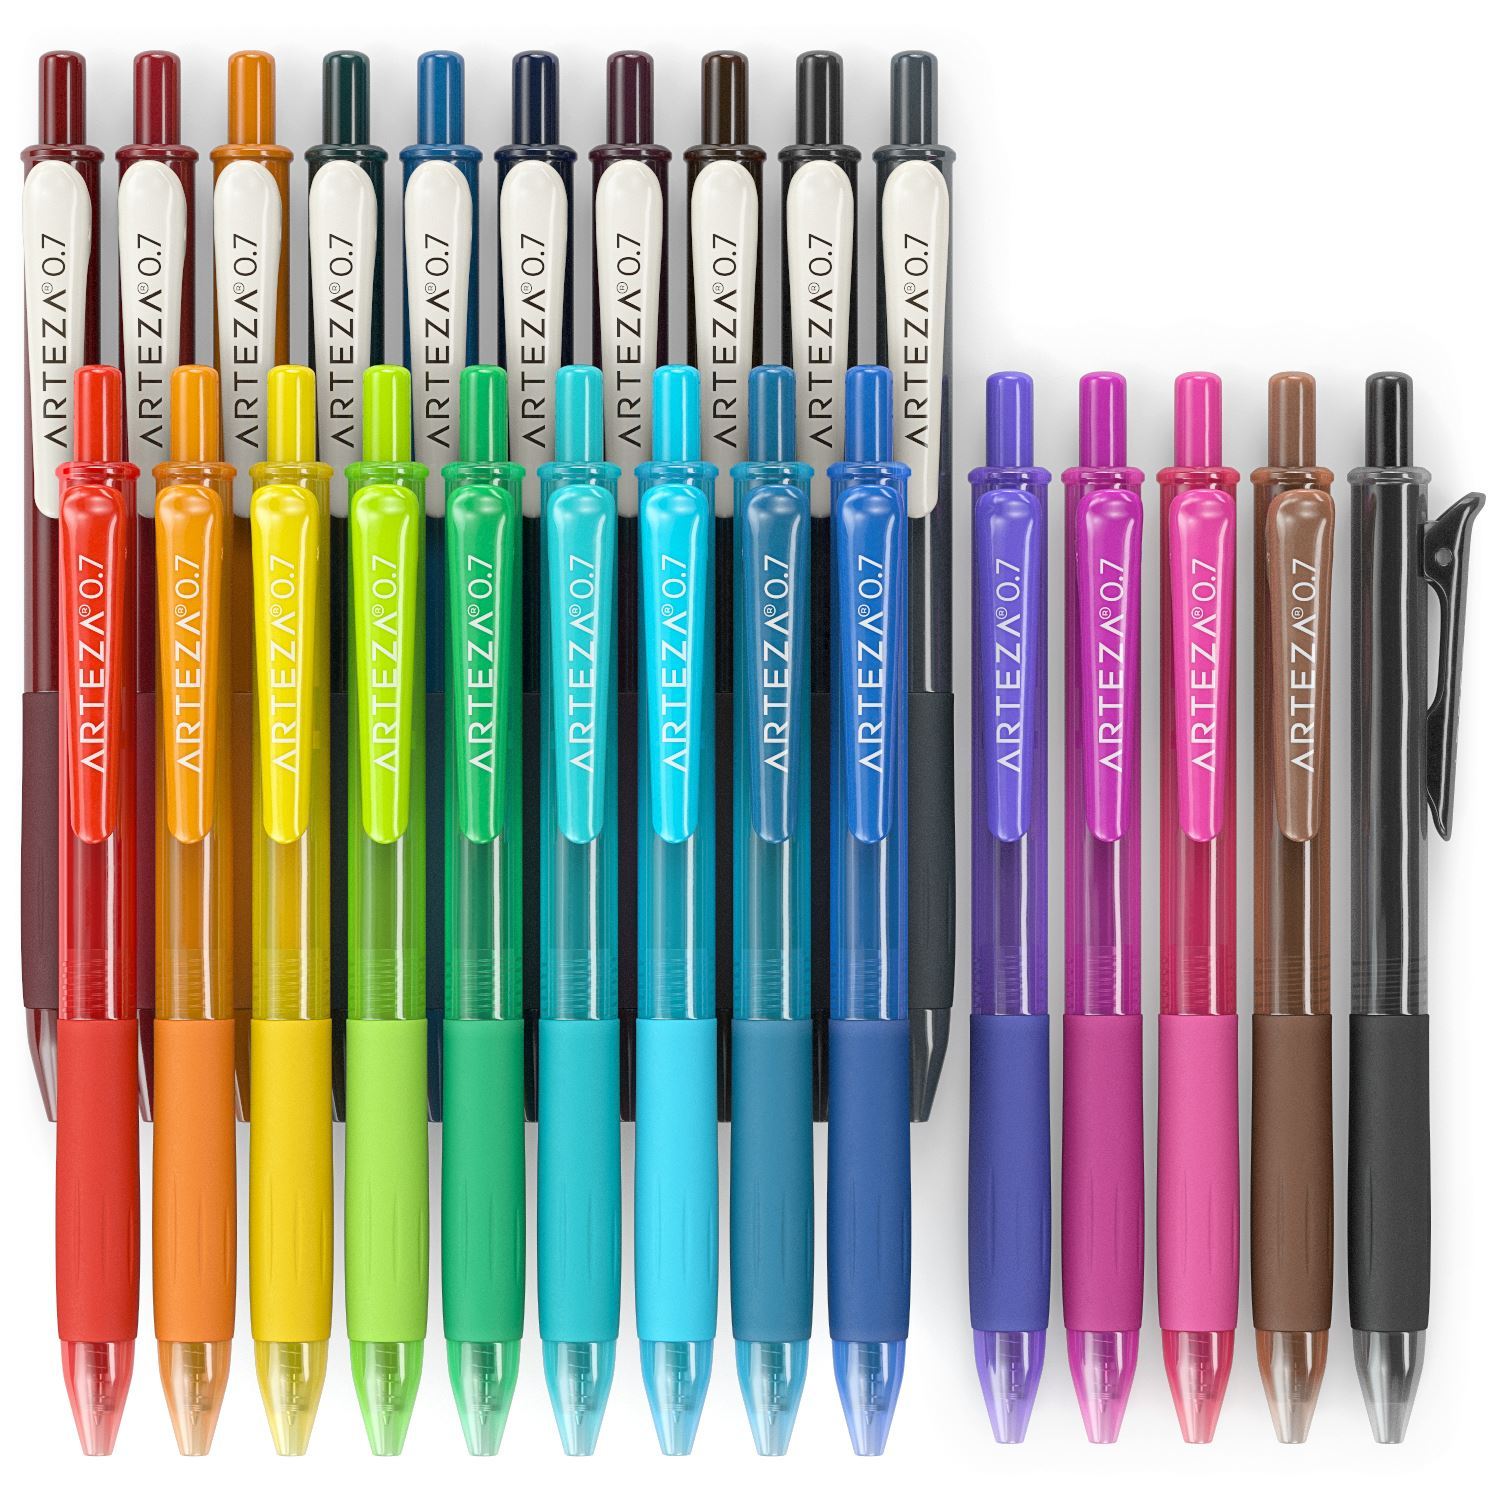 Gel Pens Set 20 Colors Medium Point Colored Pens Retractable Gel Ink Pens with Comfort Grip,Smooth Writing for Journal Notebook Planner in School